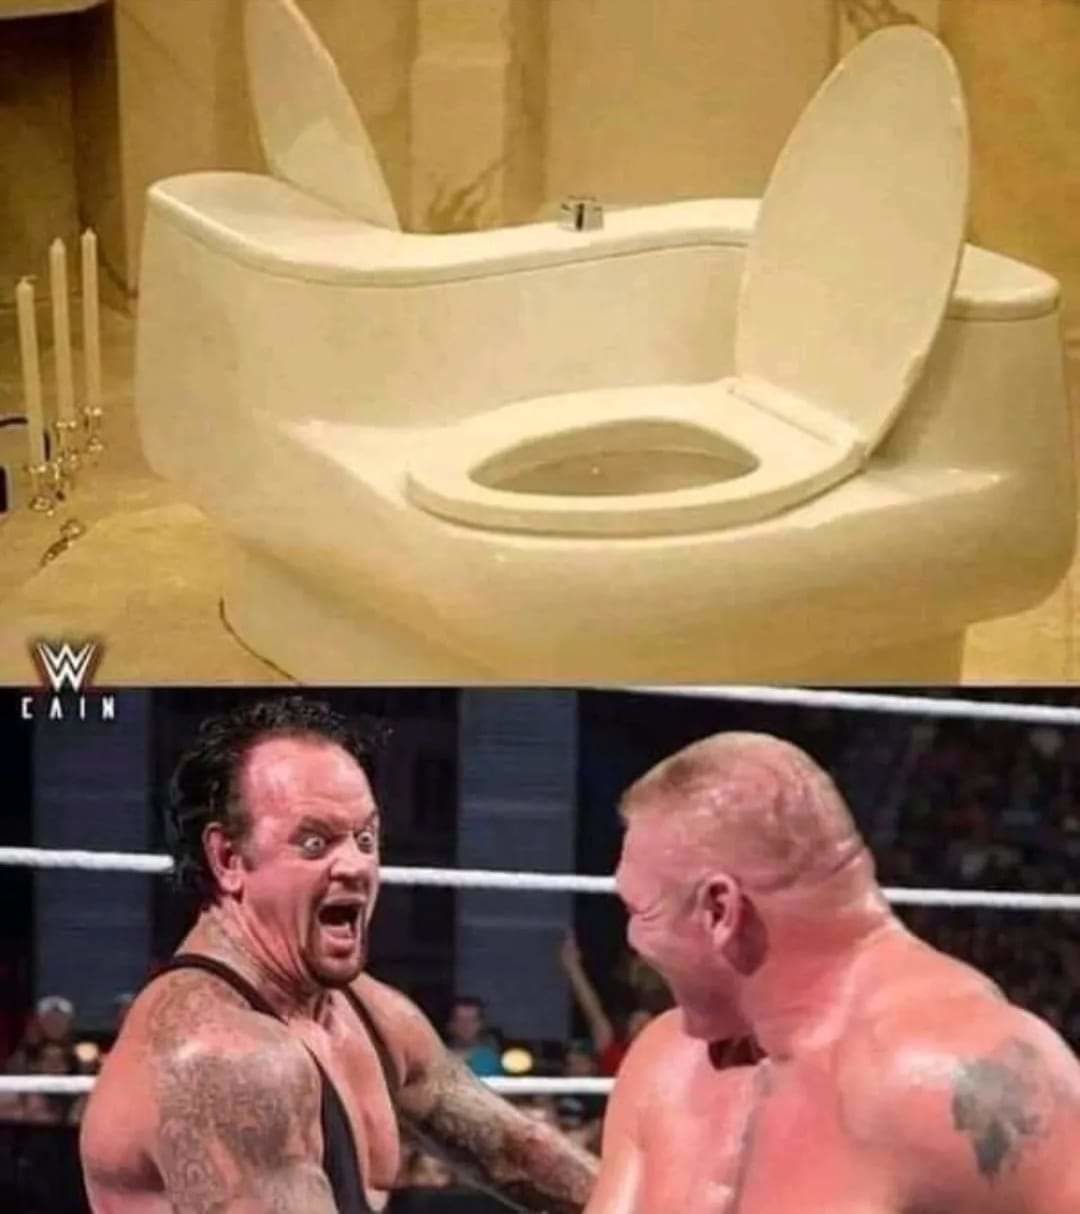 A toilet for you and your best friend. - meme